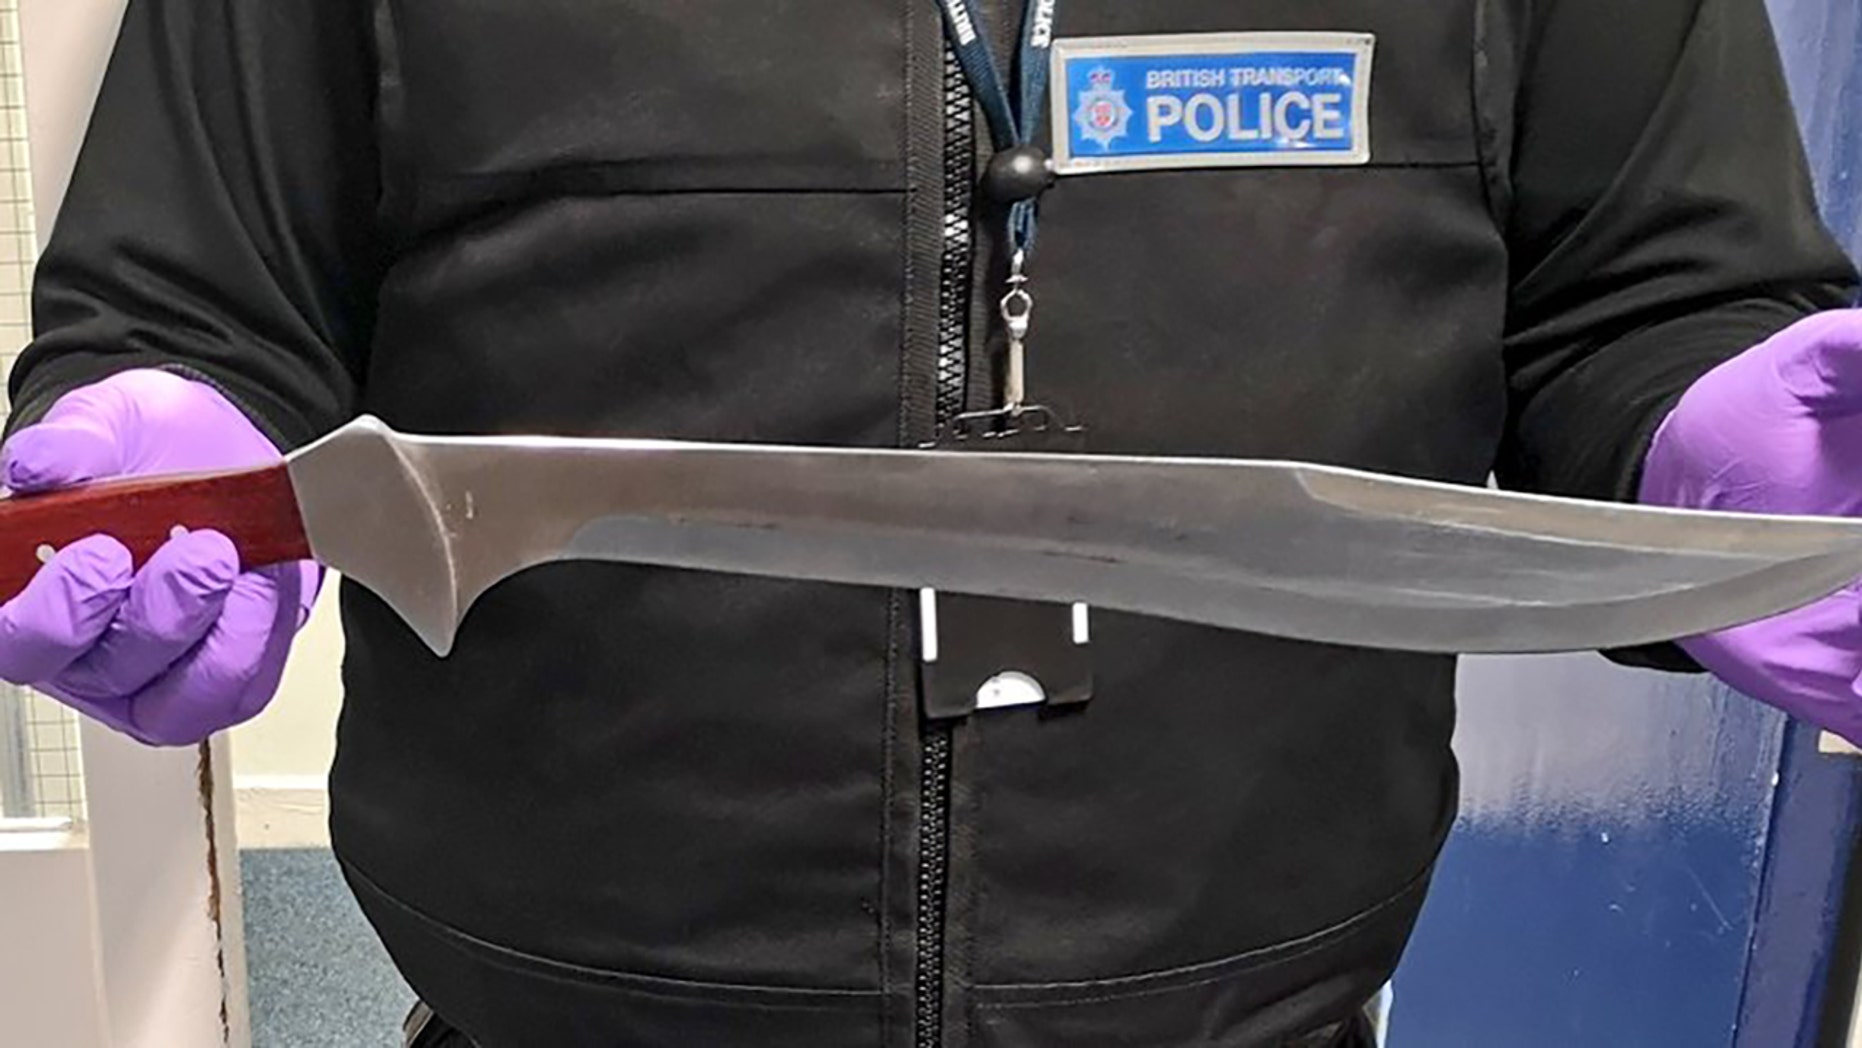 British man arrested after carrying 15-inch machete on train, police say